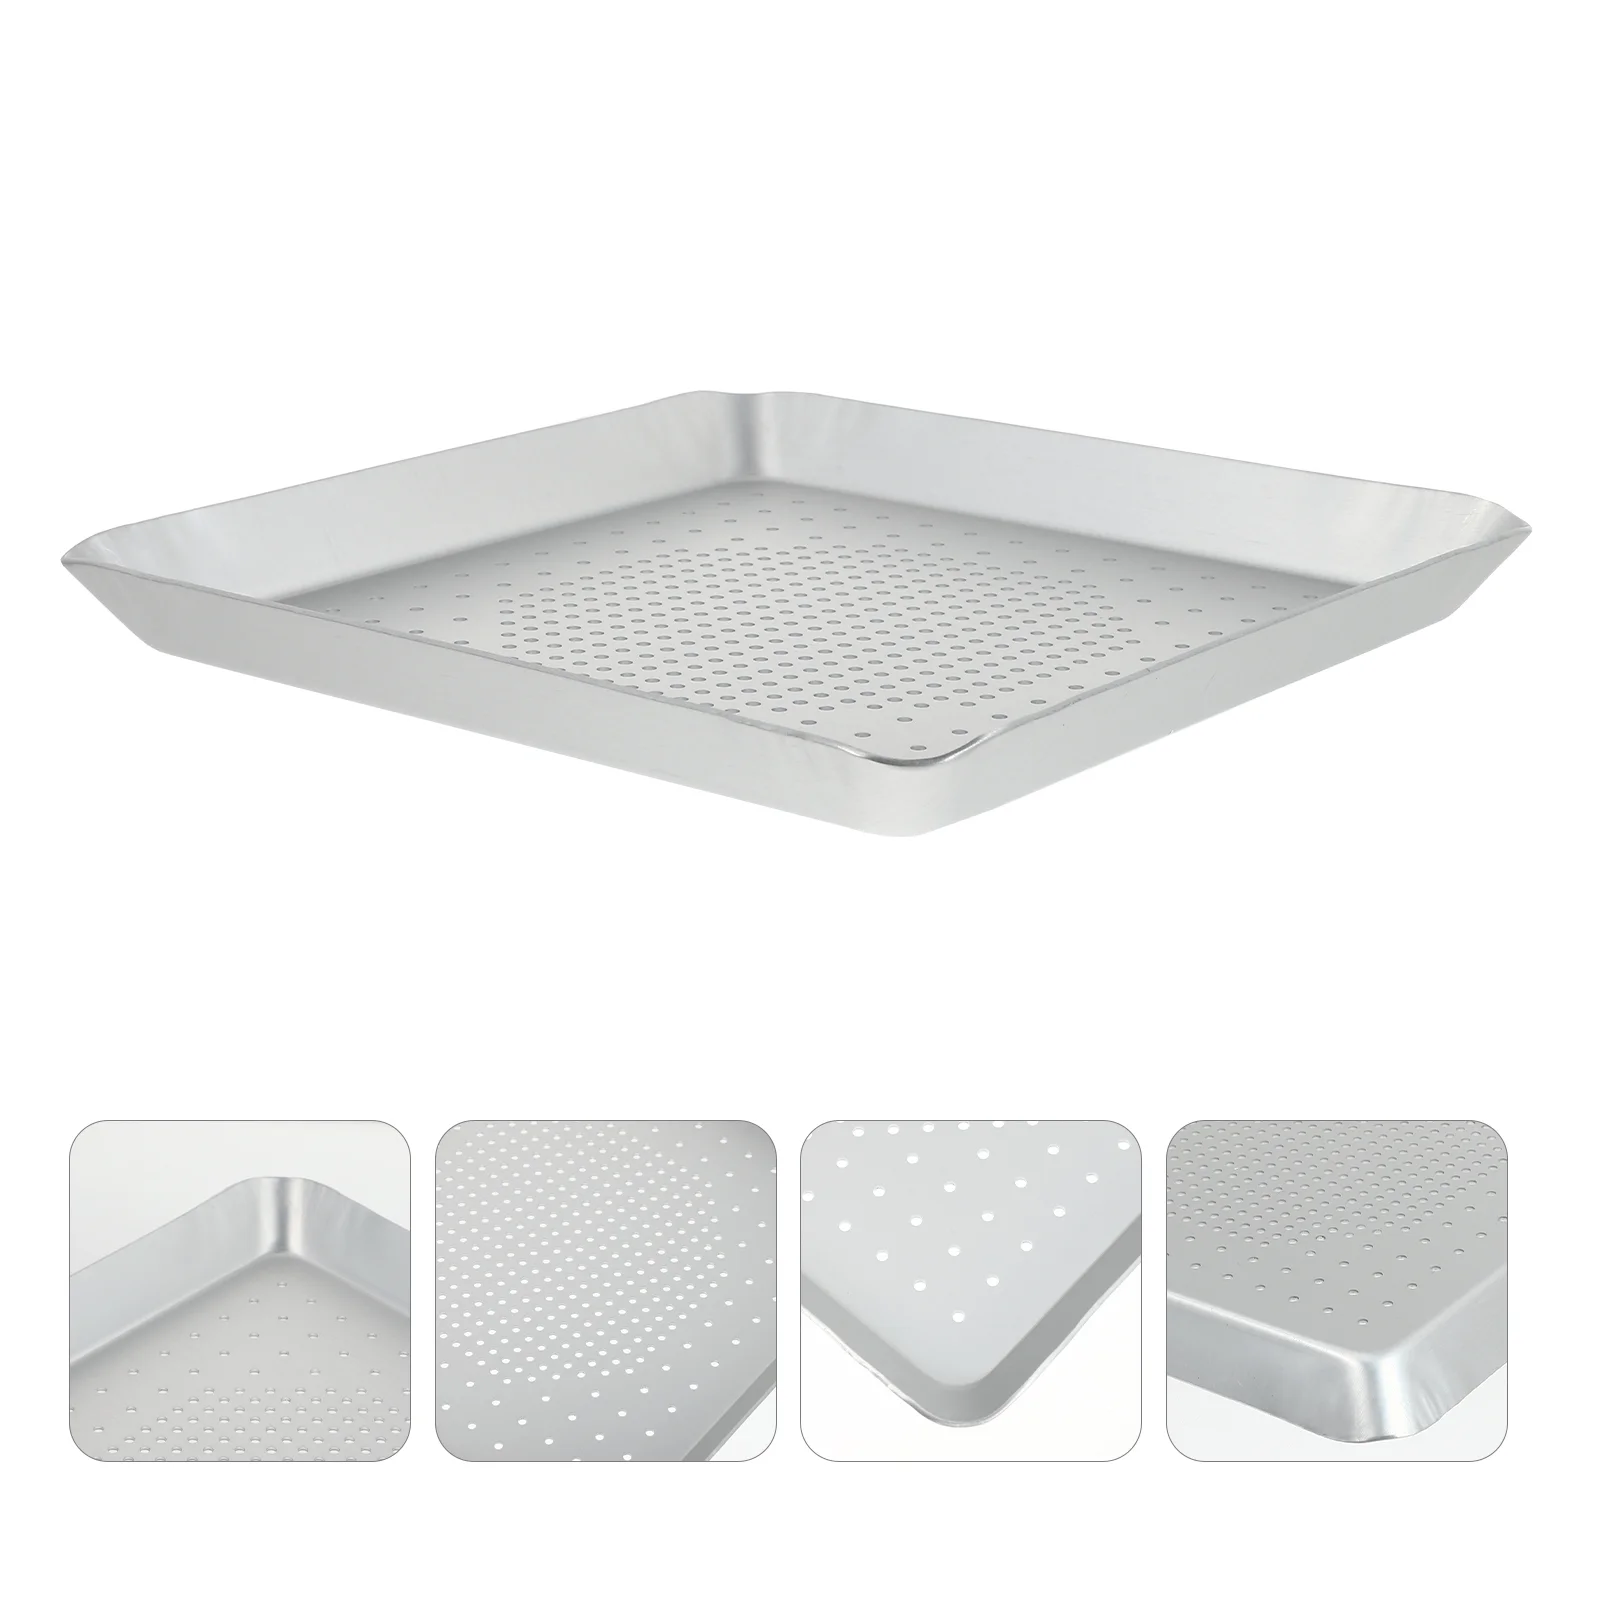 

Pizza Pan Tray Baking Oven Square Holes Plate Non Crisper Stick Steel Stainless Cake Perforated Sheet Pie Bakeware Aluminium